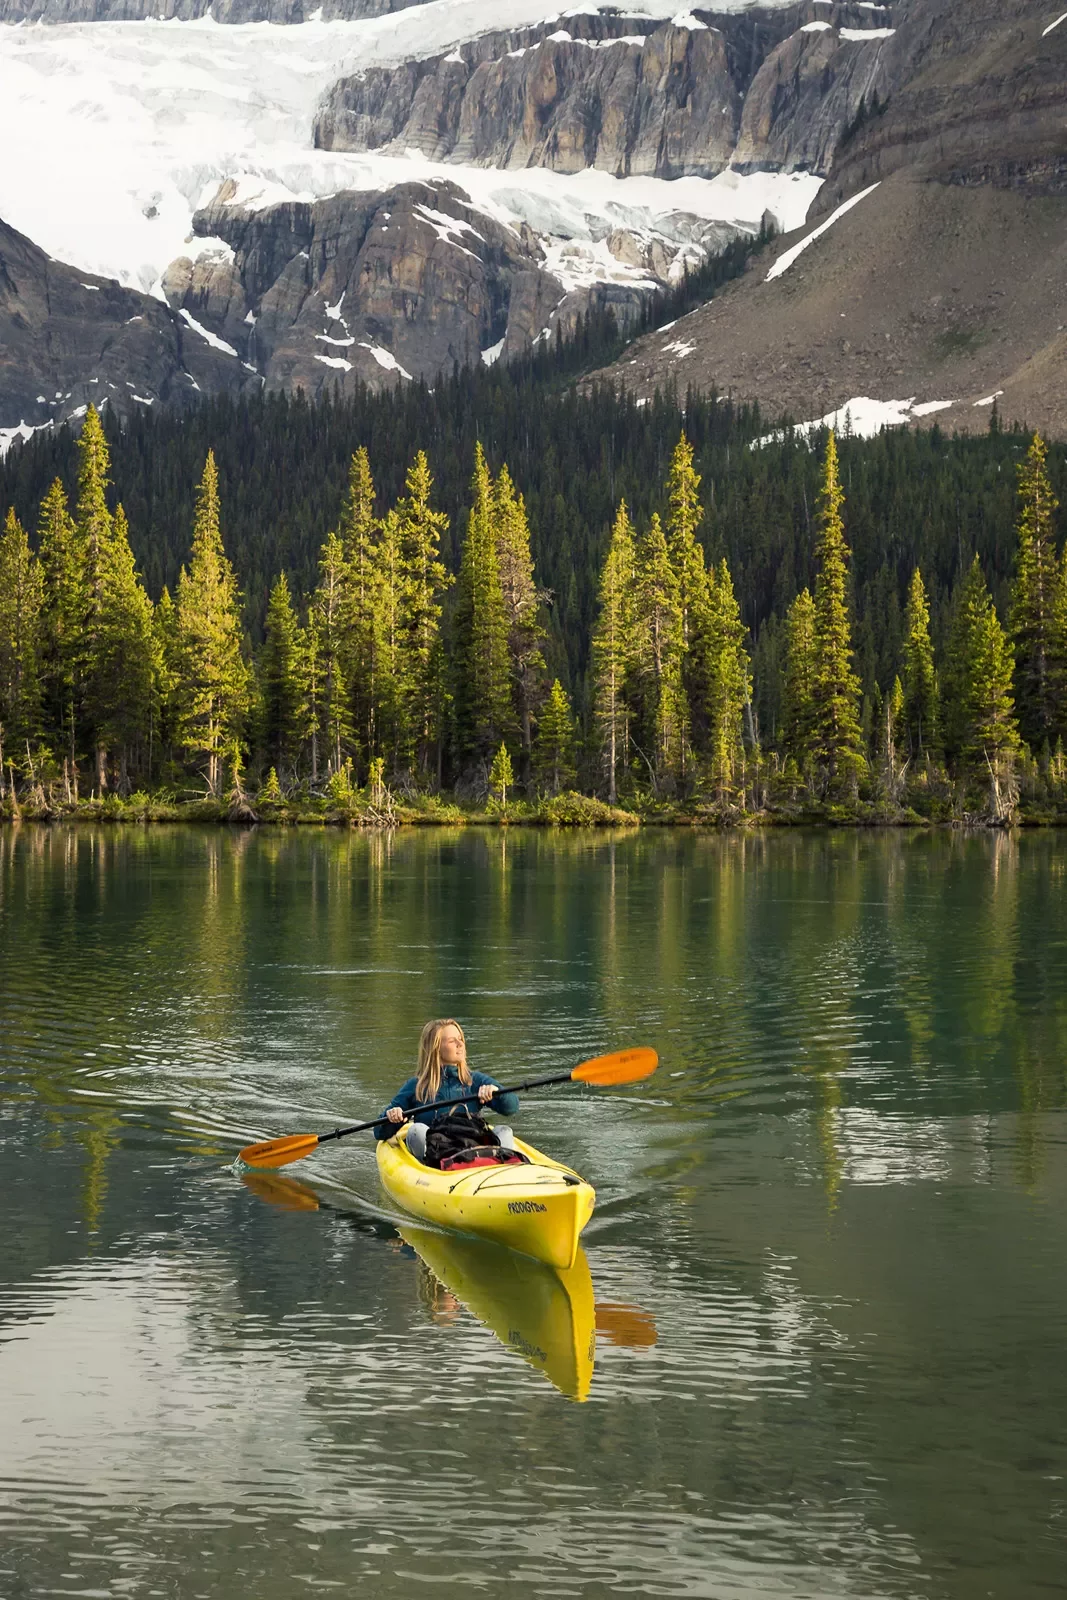 Guest kayaking in lake, forest, hills in distance.